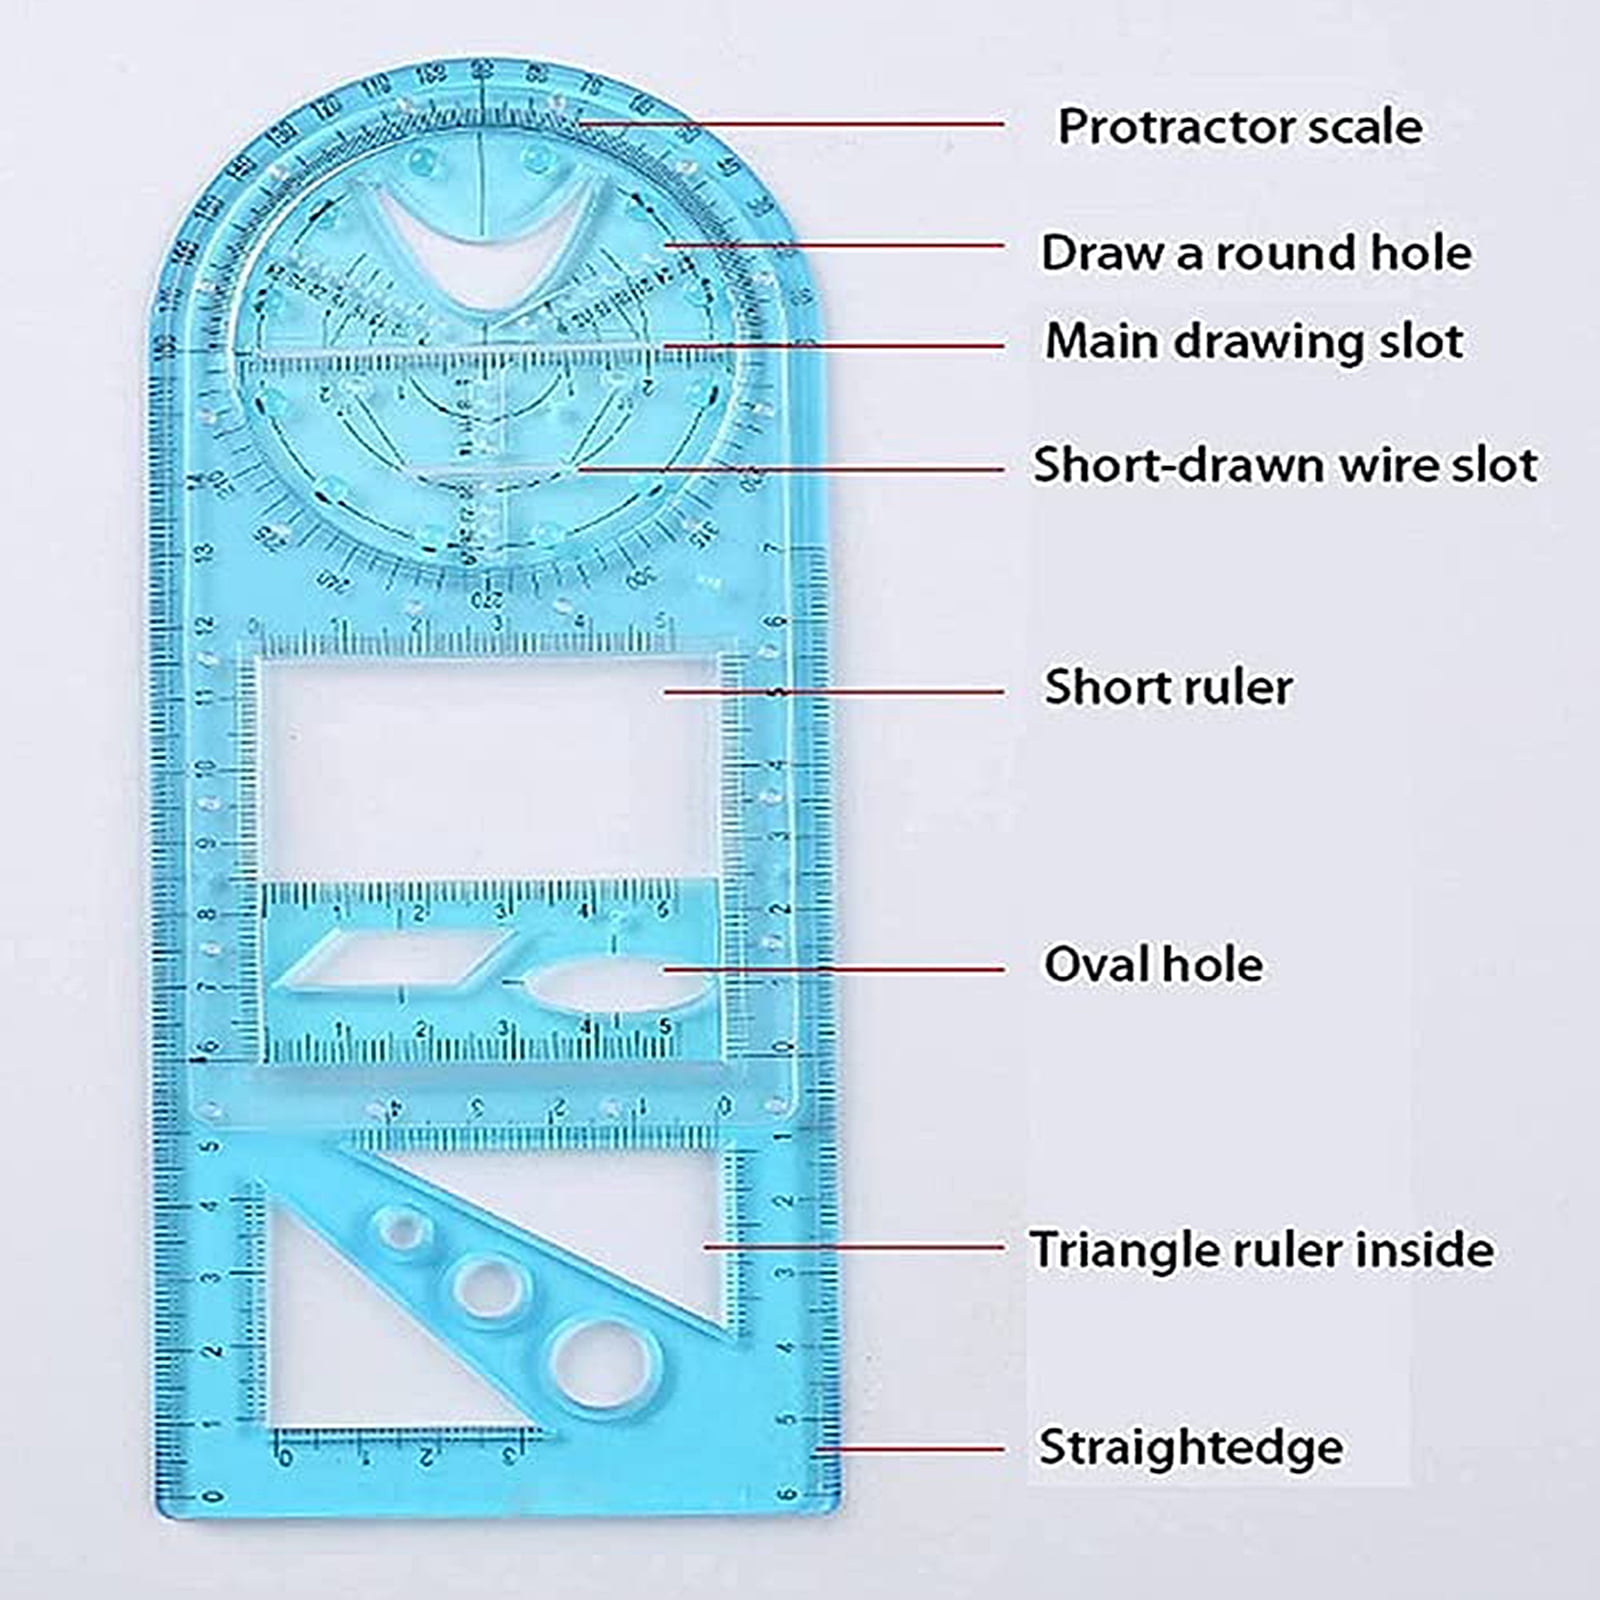 STOBOK 1 Set Protractor Tools Ruler Measurement Tool File Folders  Decorative Meter Sticks for Classroom Architecture Drawing Supply Drafting  Tool